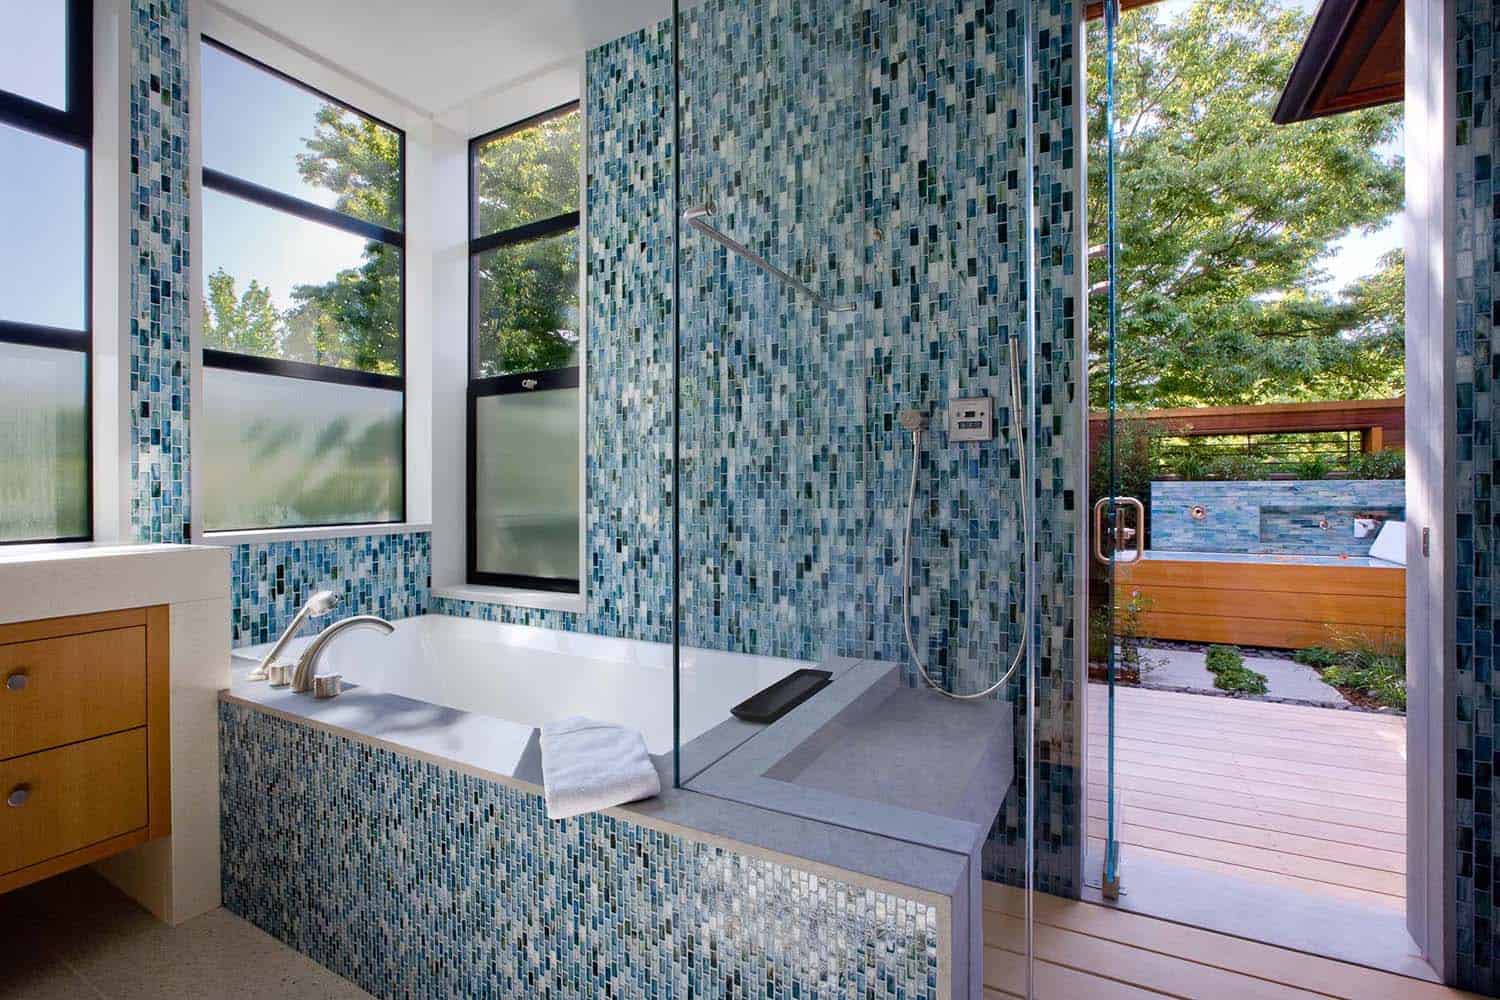 walk through the shower to an outdoor deck with an outdoor shower and tub